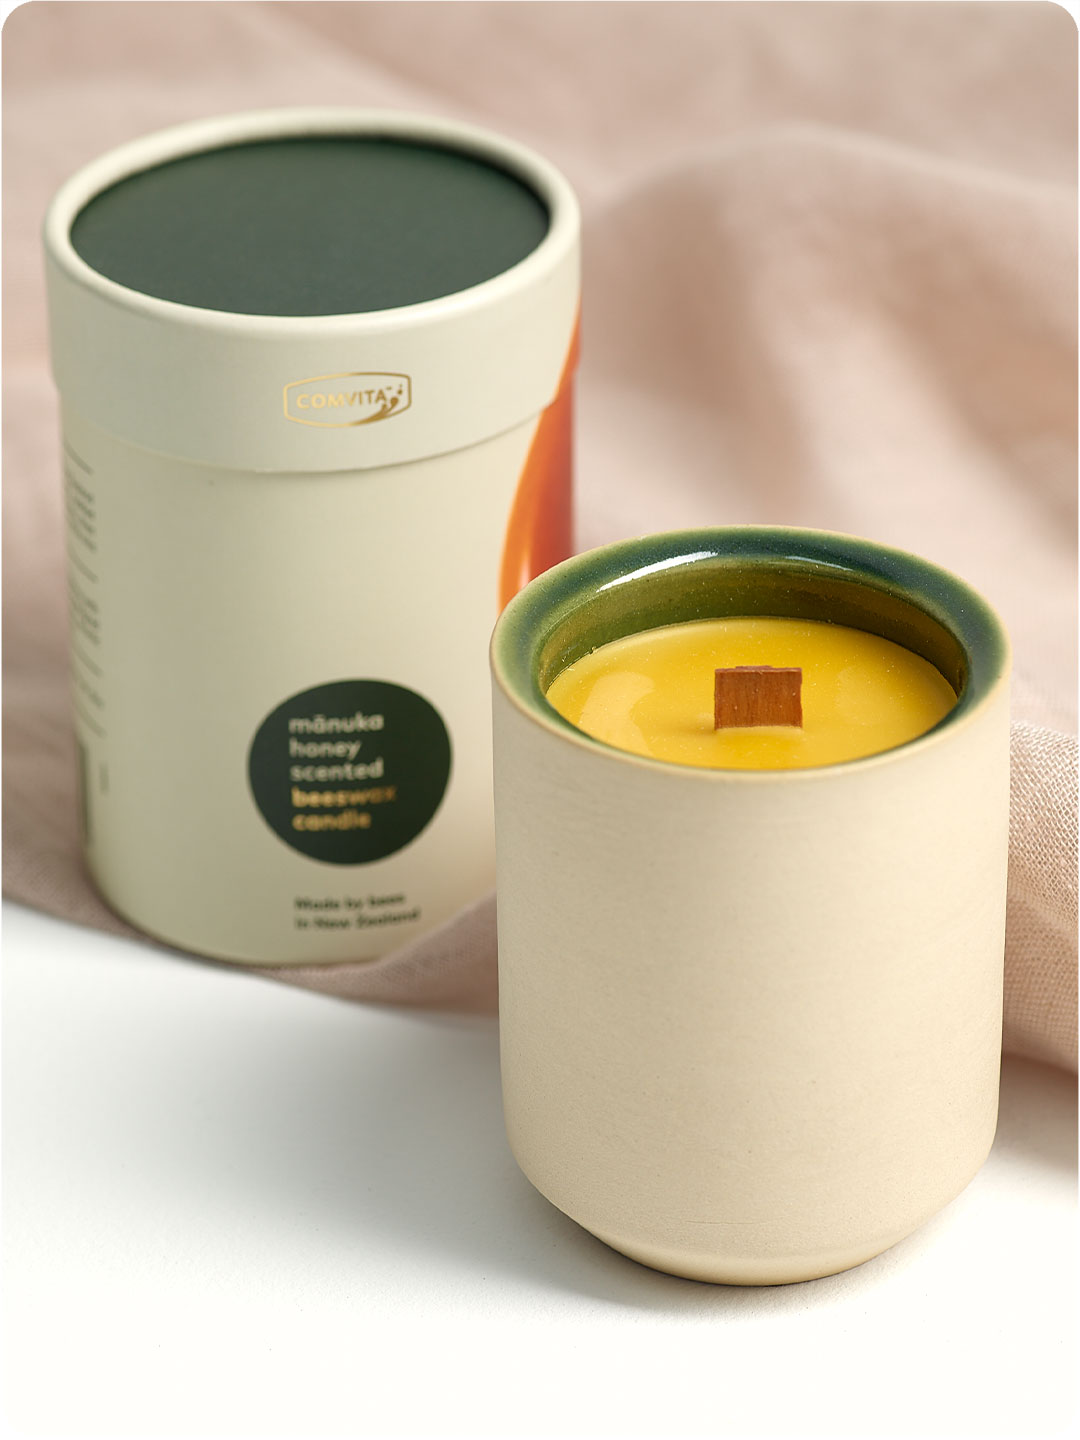 Manuka Honey-Scented Beeswax Candle